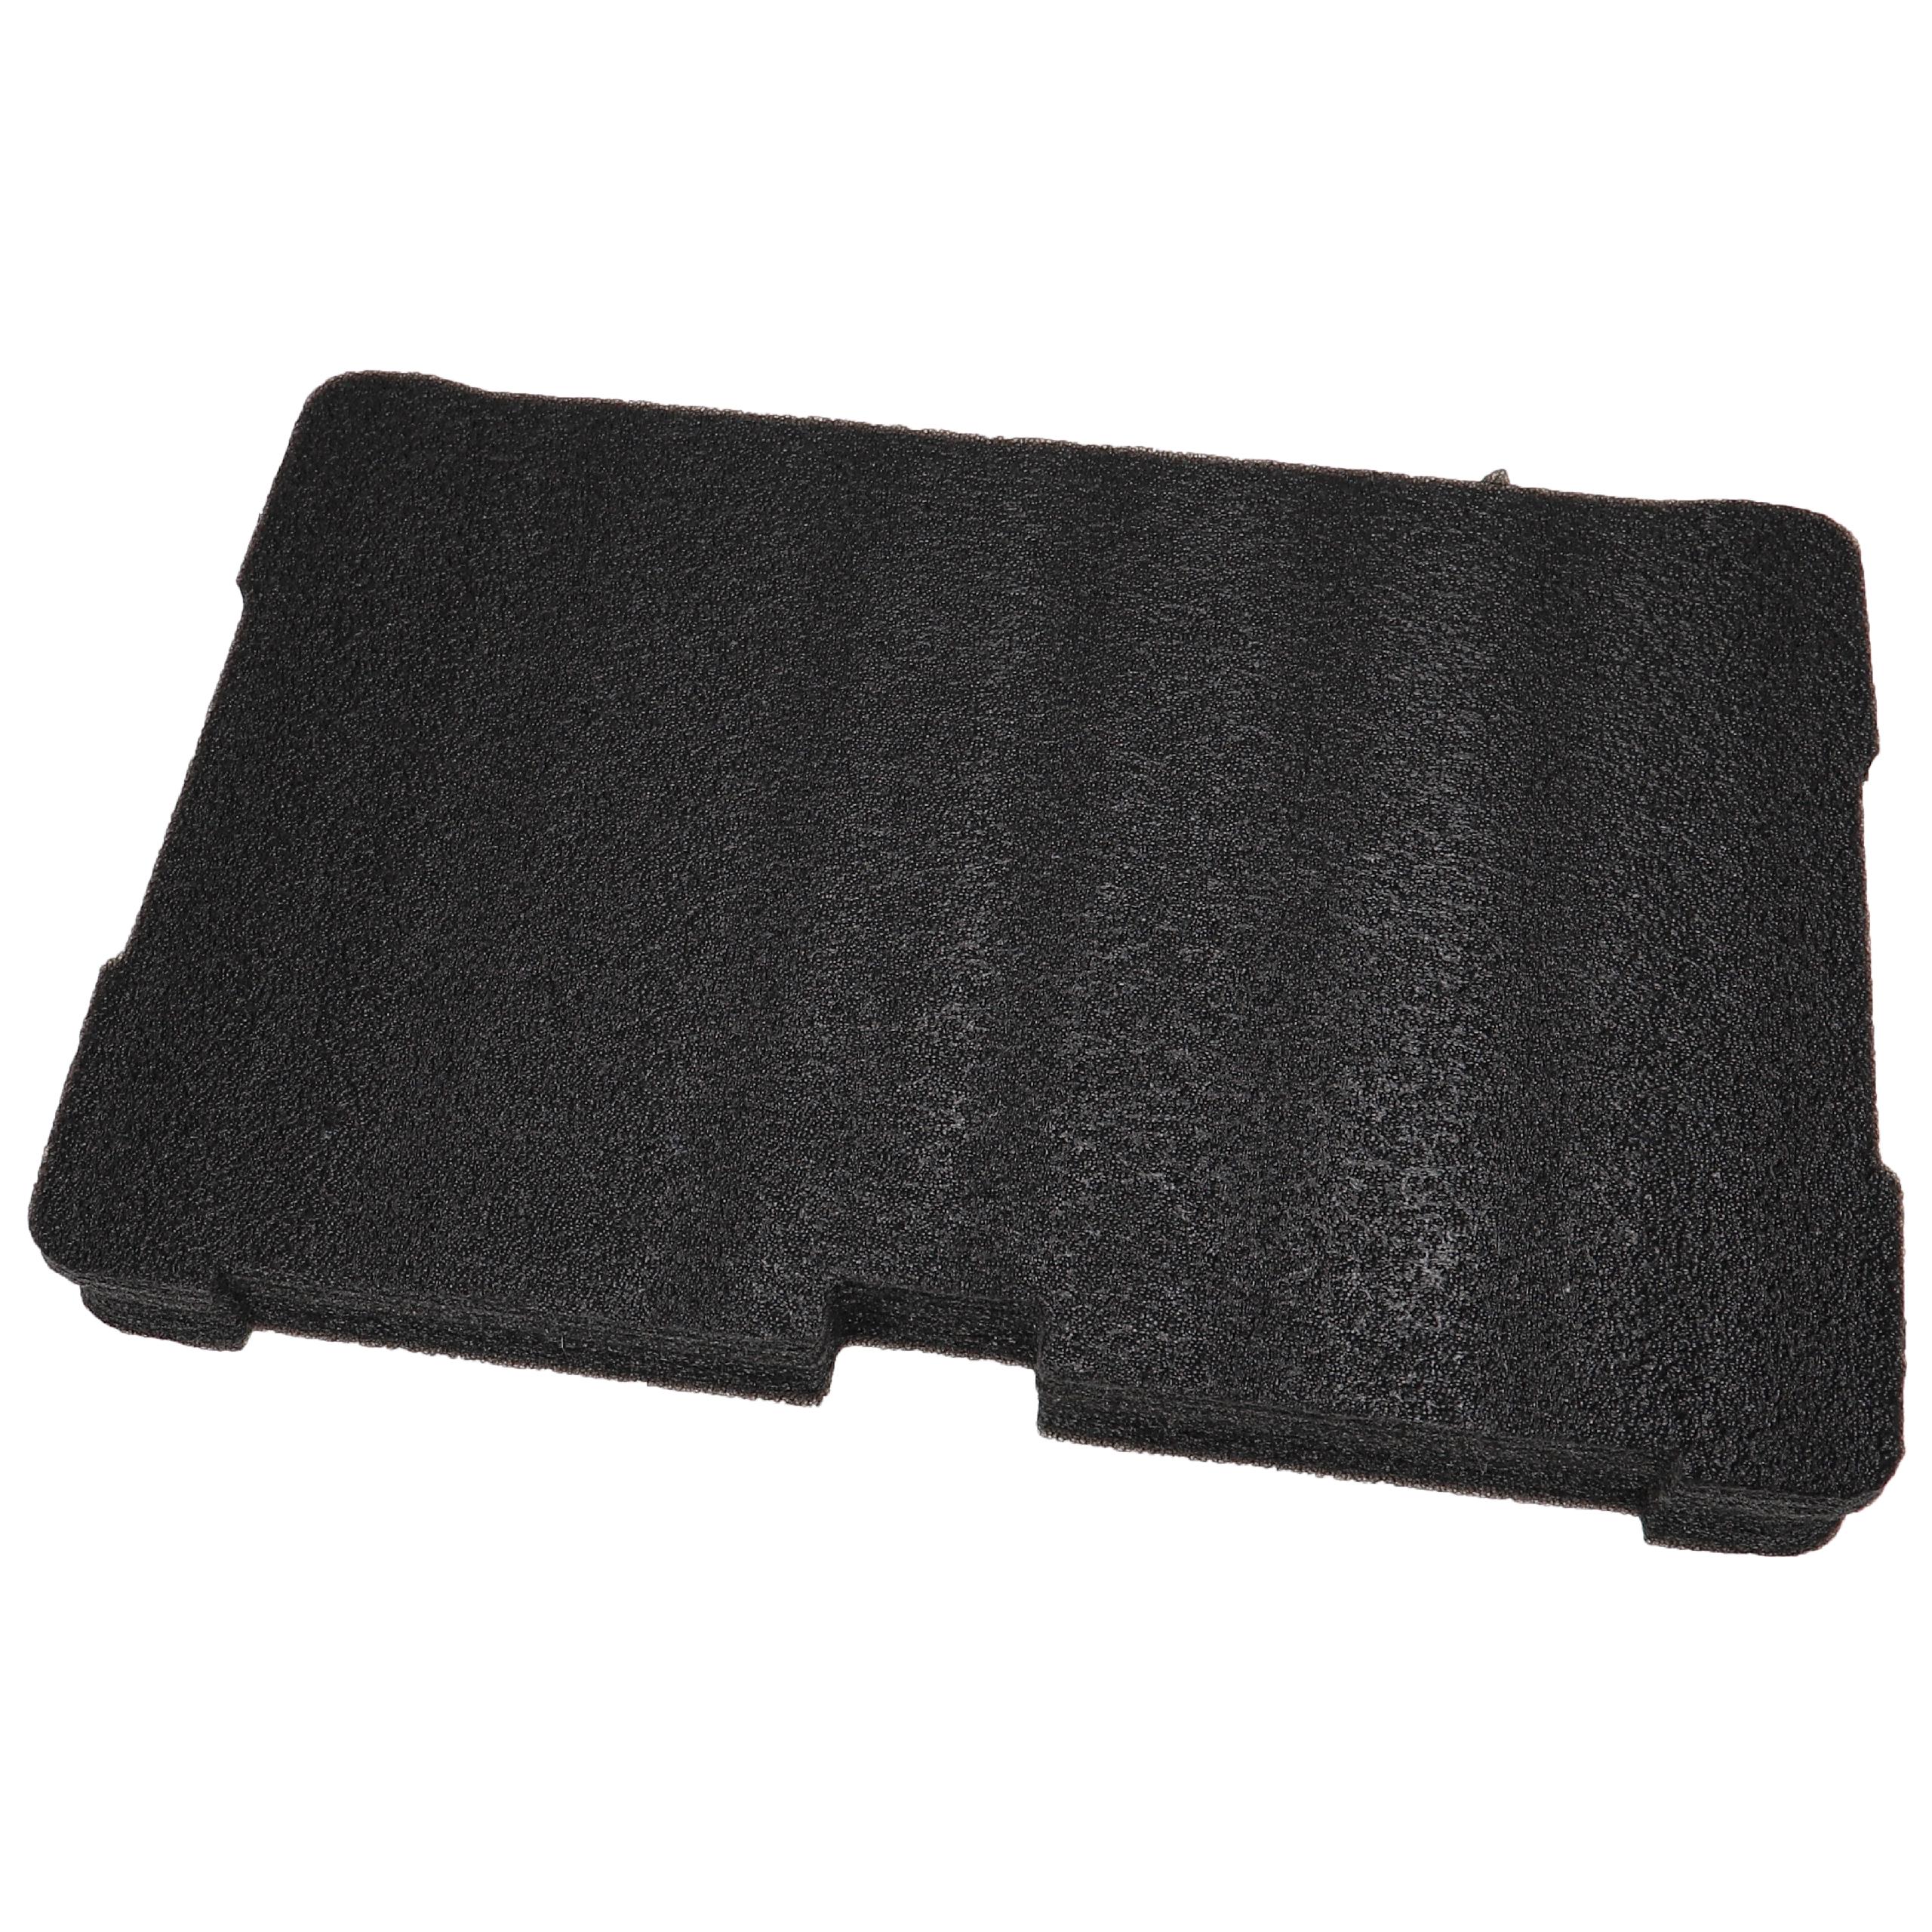 vhbw Foam Insert Replacement for Milwaukee 4932471428 for Toolbox - Foam Black